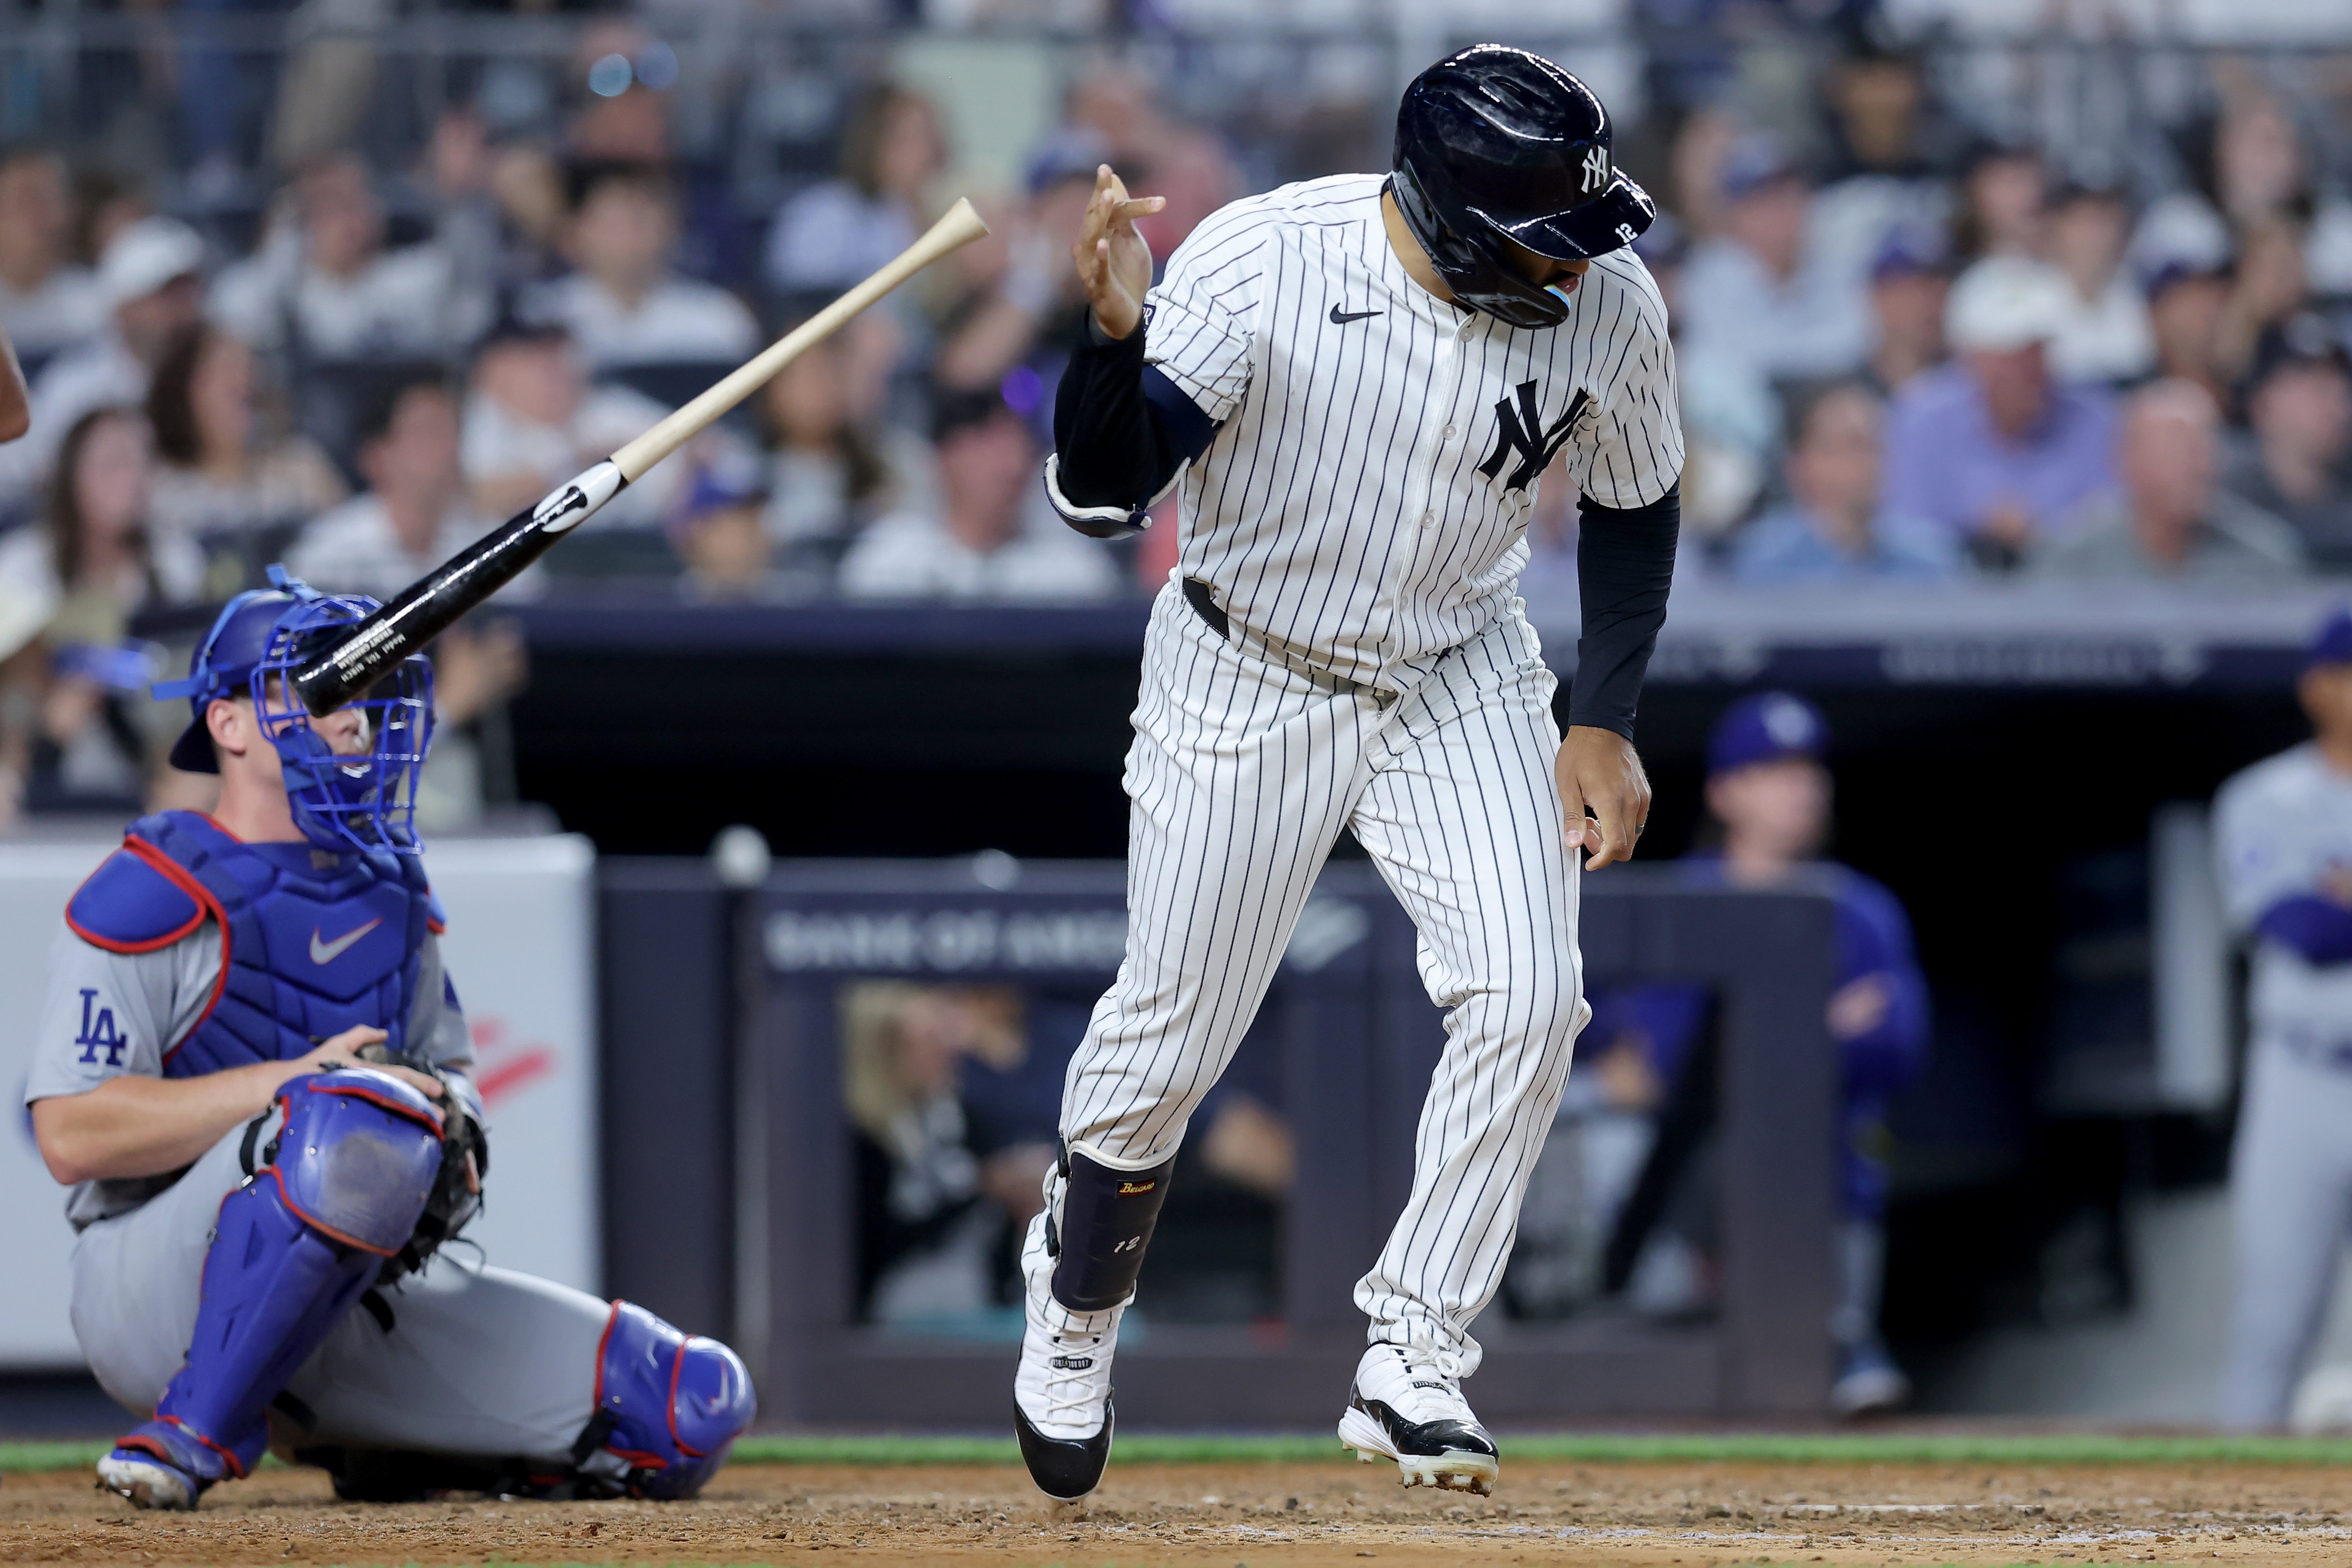 Yankees’ struggling outfielder comes to the rescue against Dodgers